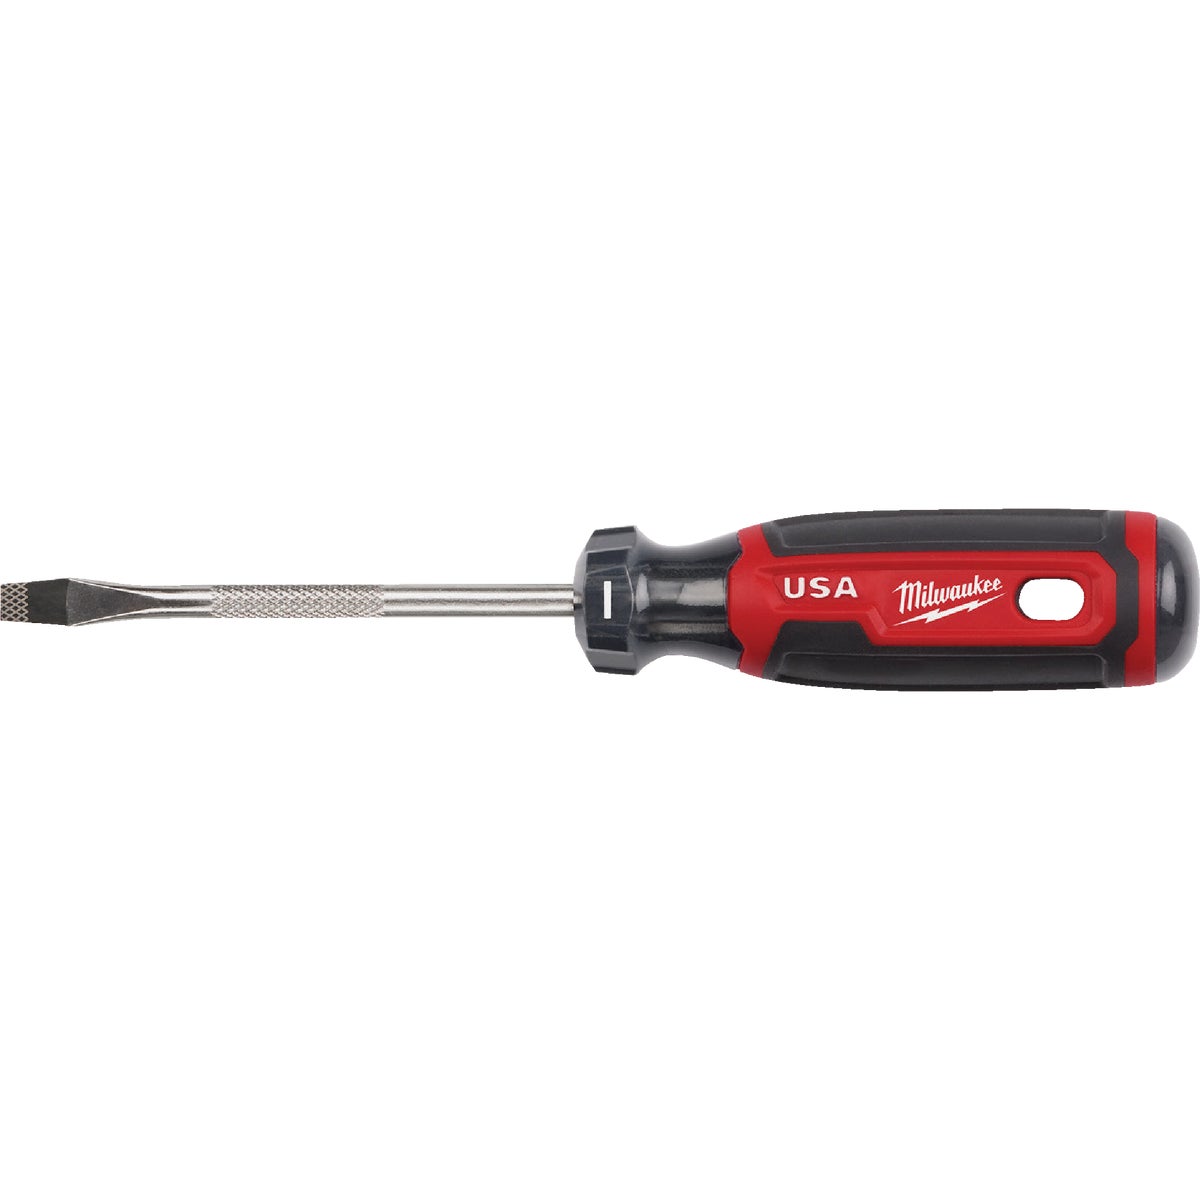 Milwaukee 1/4 In. x 4 In. Cushion Grip Slotted Screwdriver (USA)